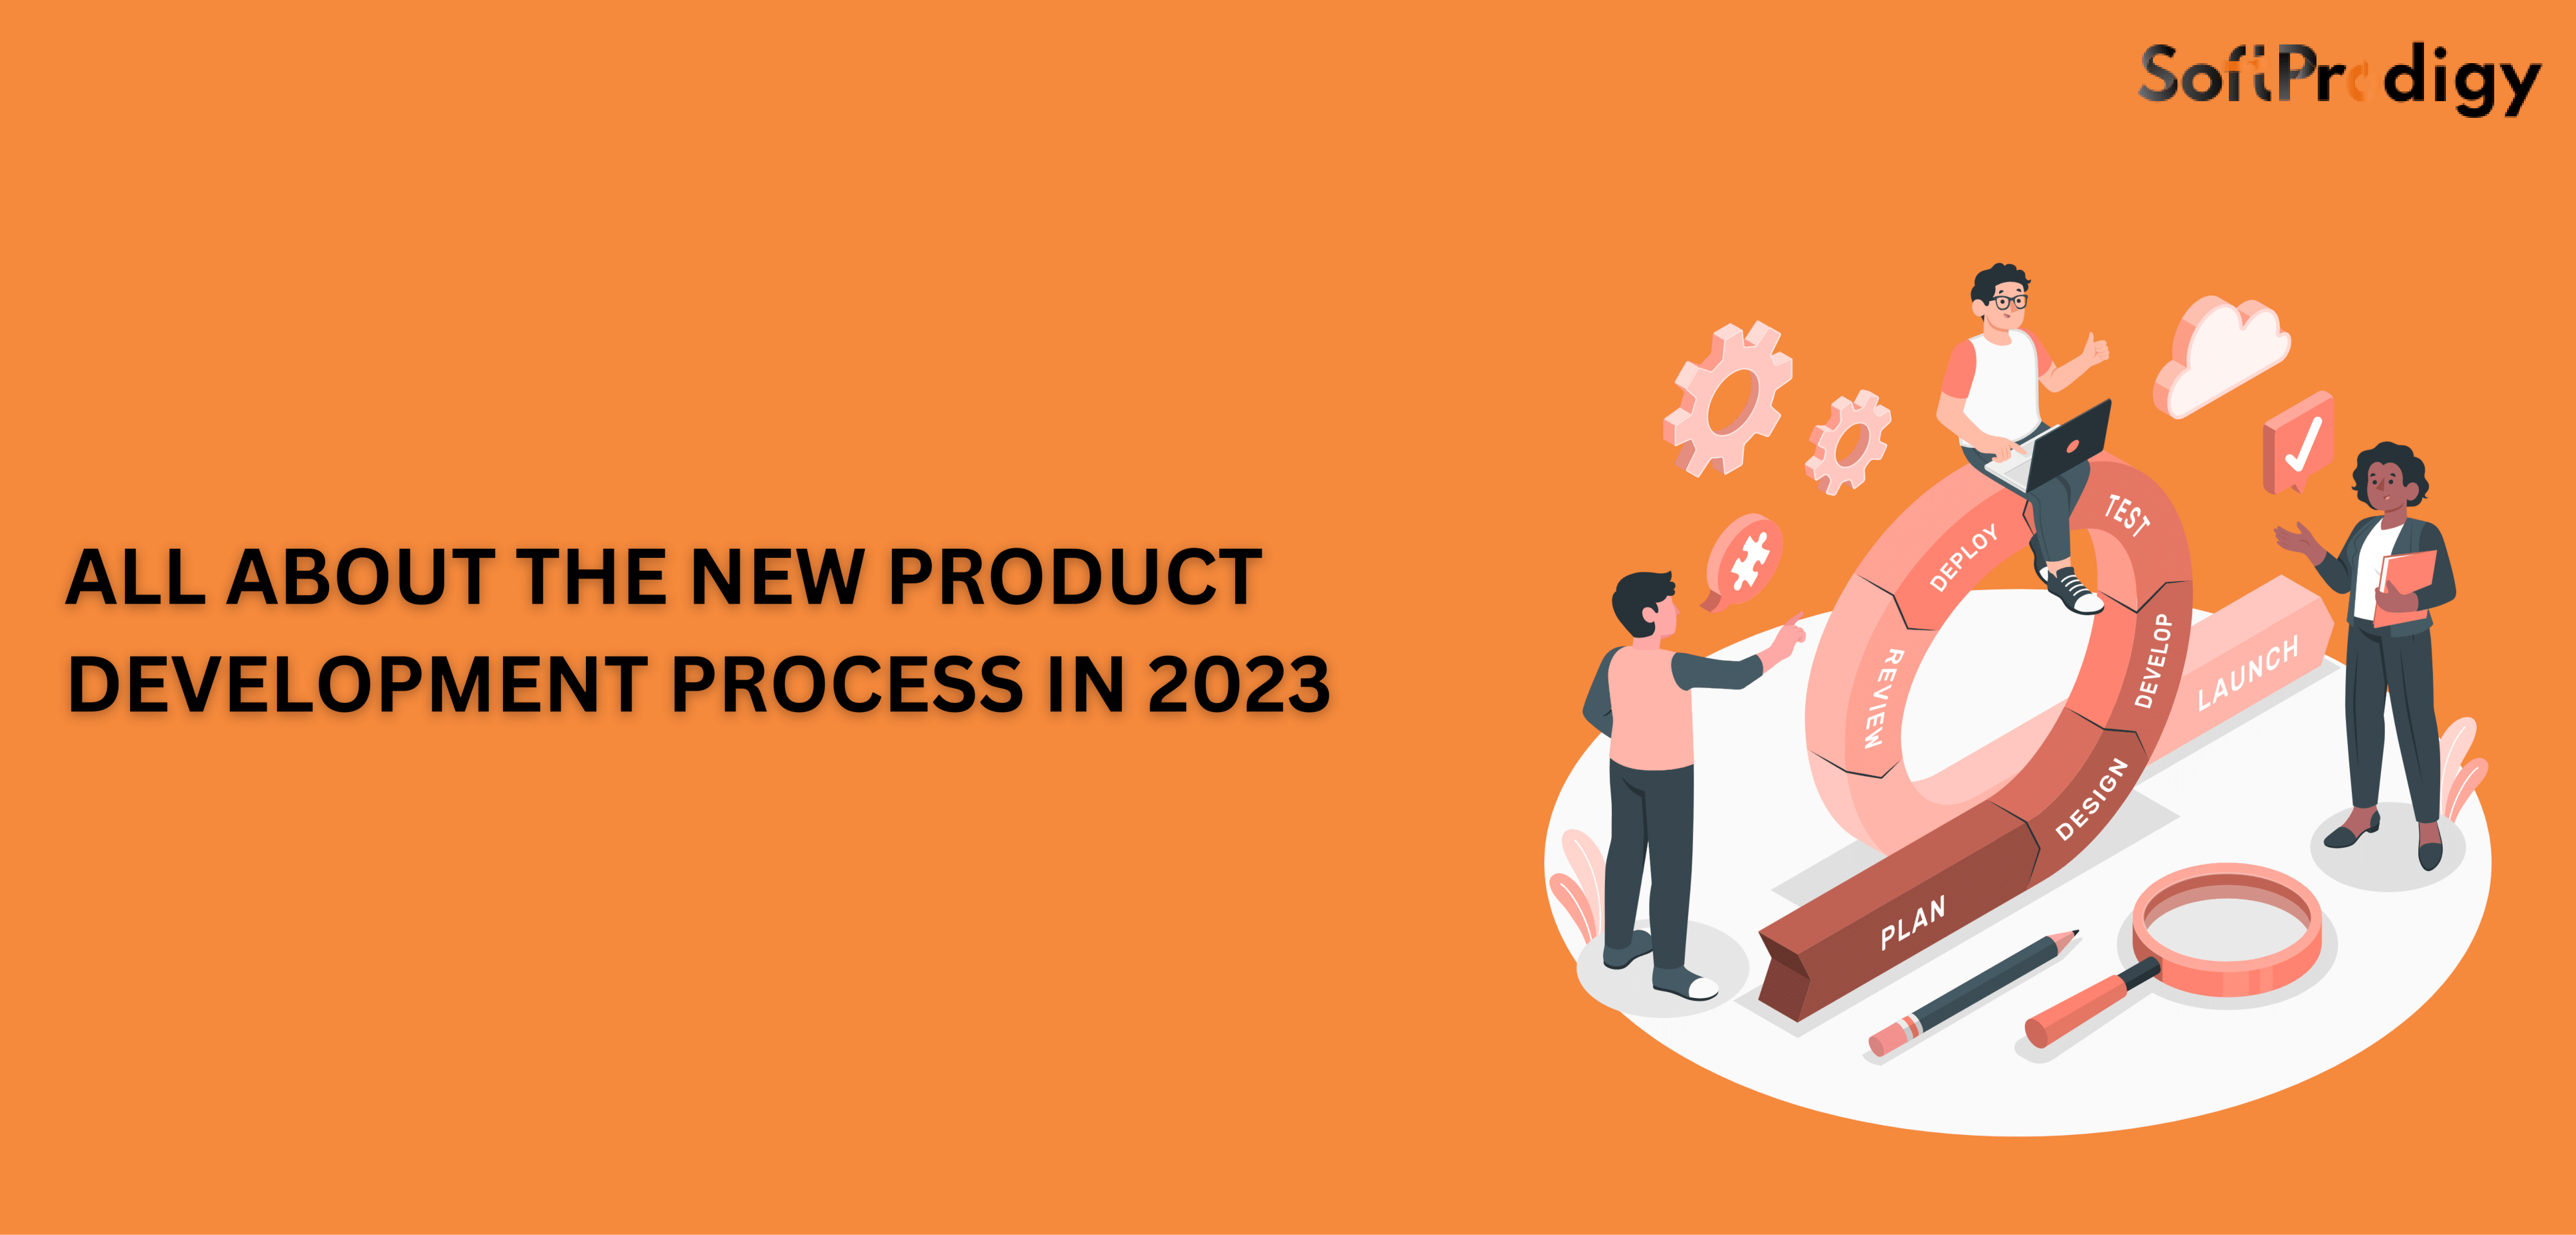 All About The New Product Development Process In 2023 1 1 